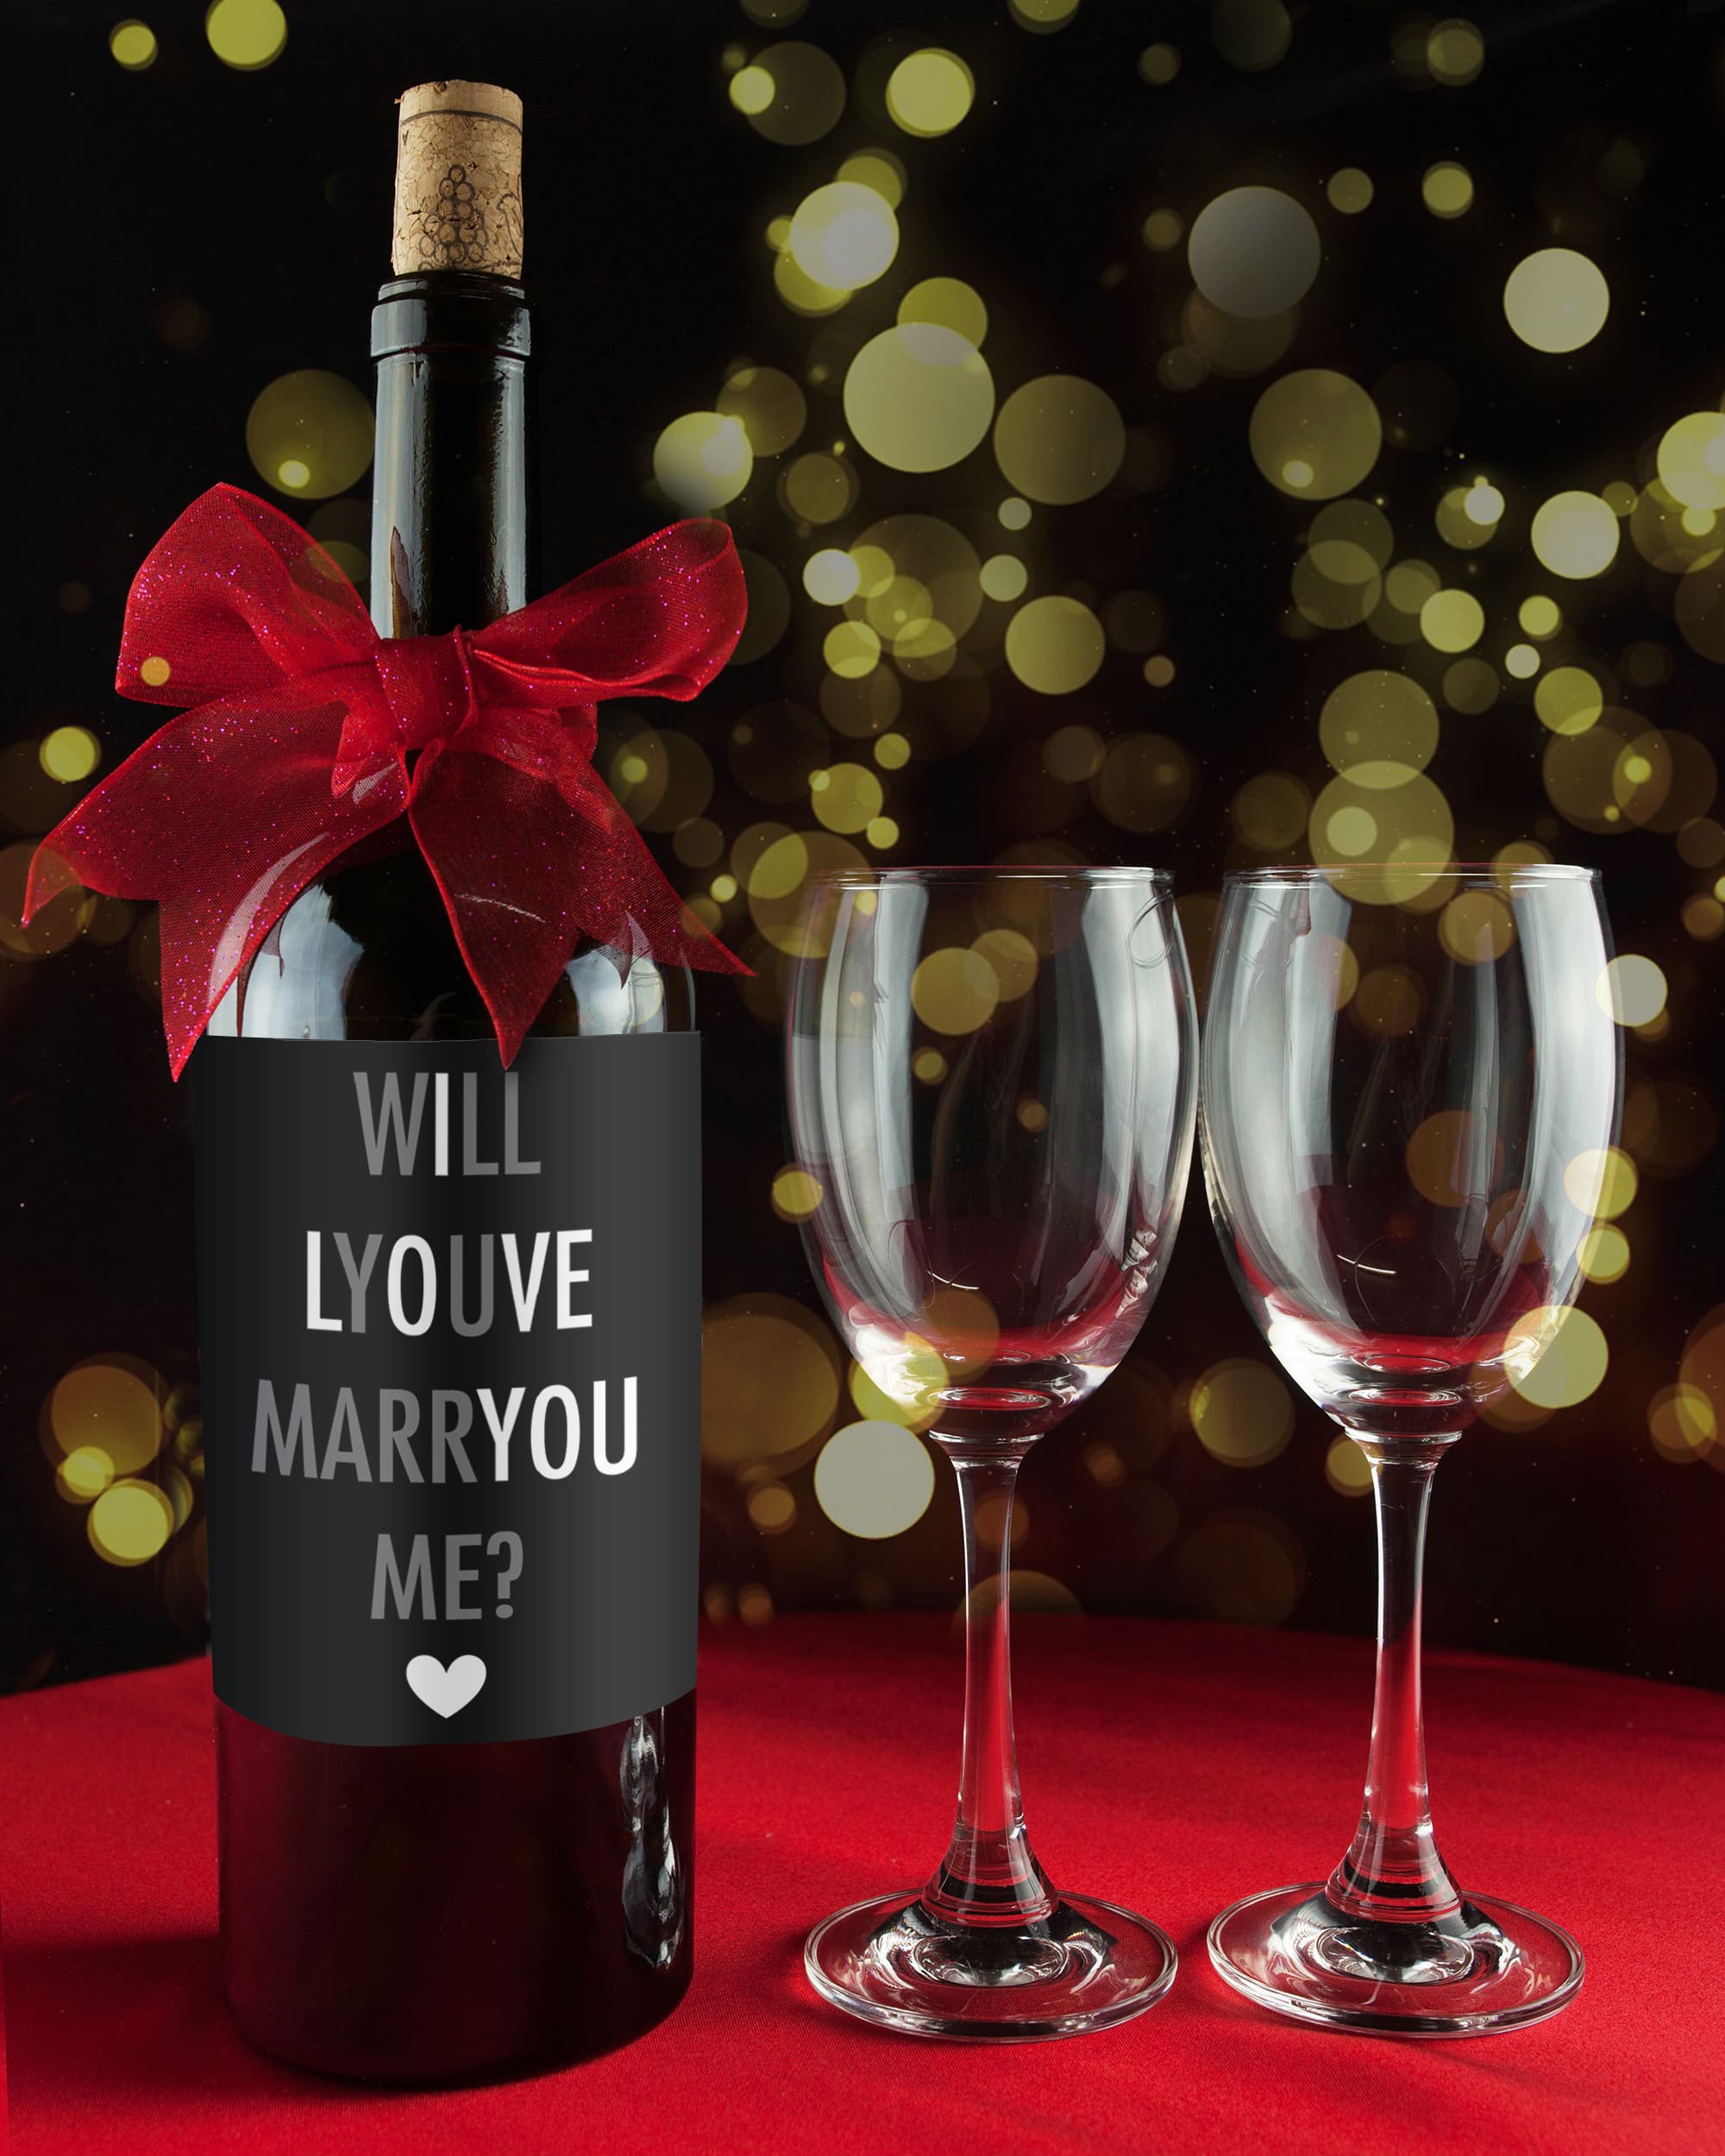 Propose with Valentine Wine + Ten Verses to Ask Her (P.S. She’ll Love It!)